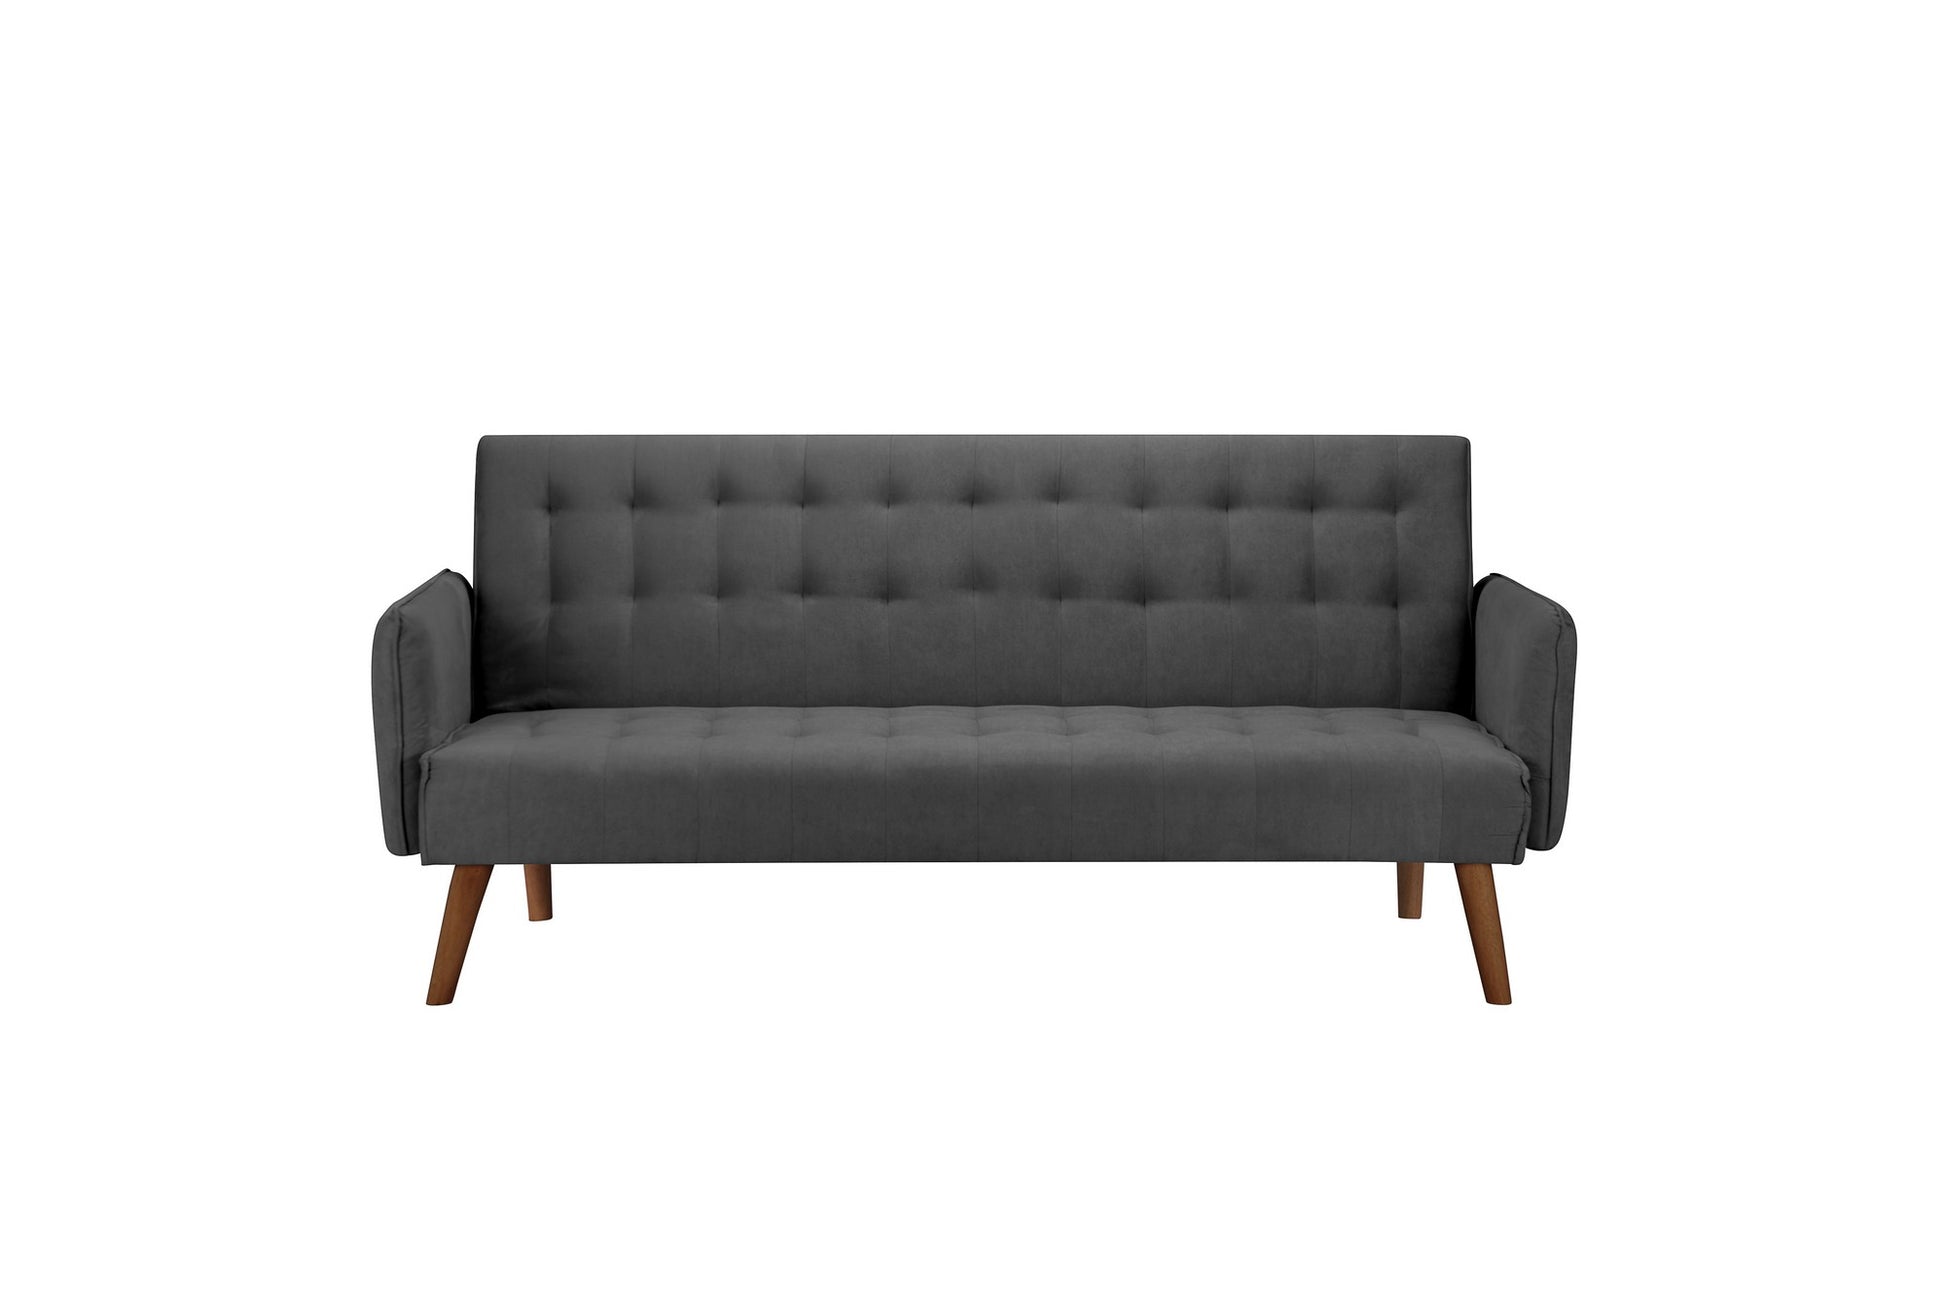 Modern Hudson Sofa Bed - Contemporary, Upholstered, Ideal for Occasional Guest Bed, Max Load 250kg